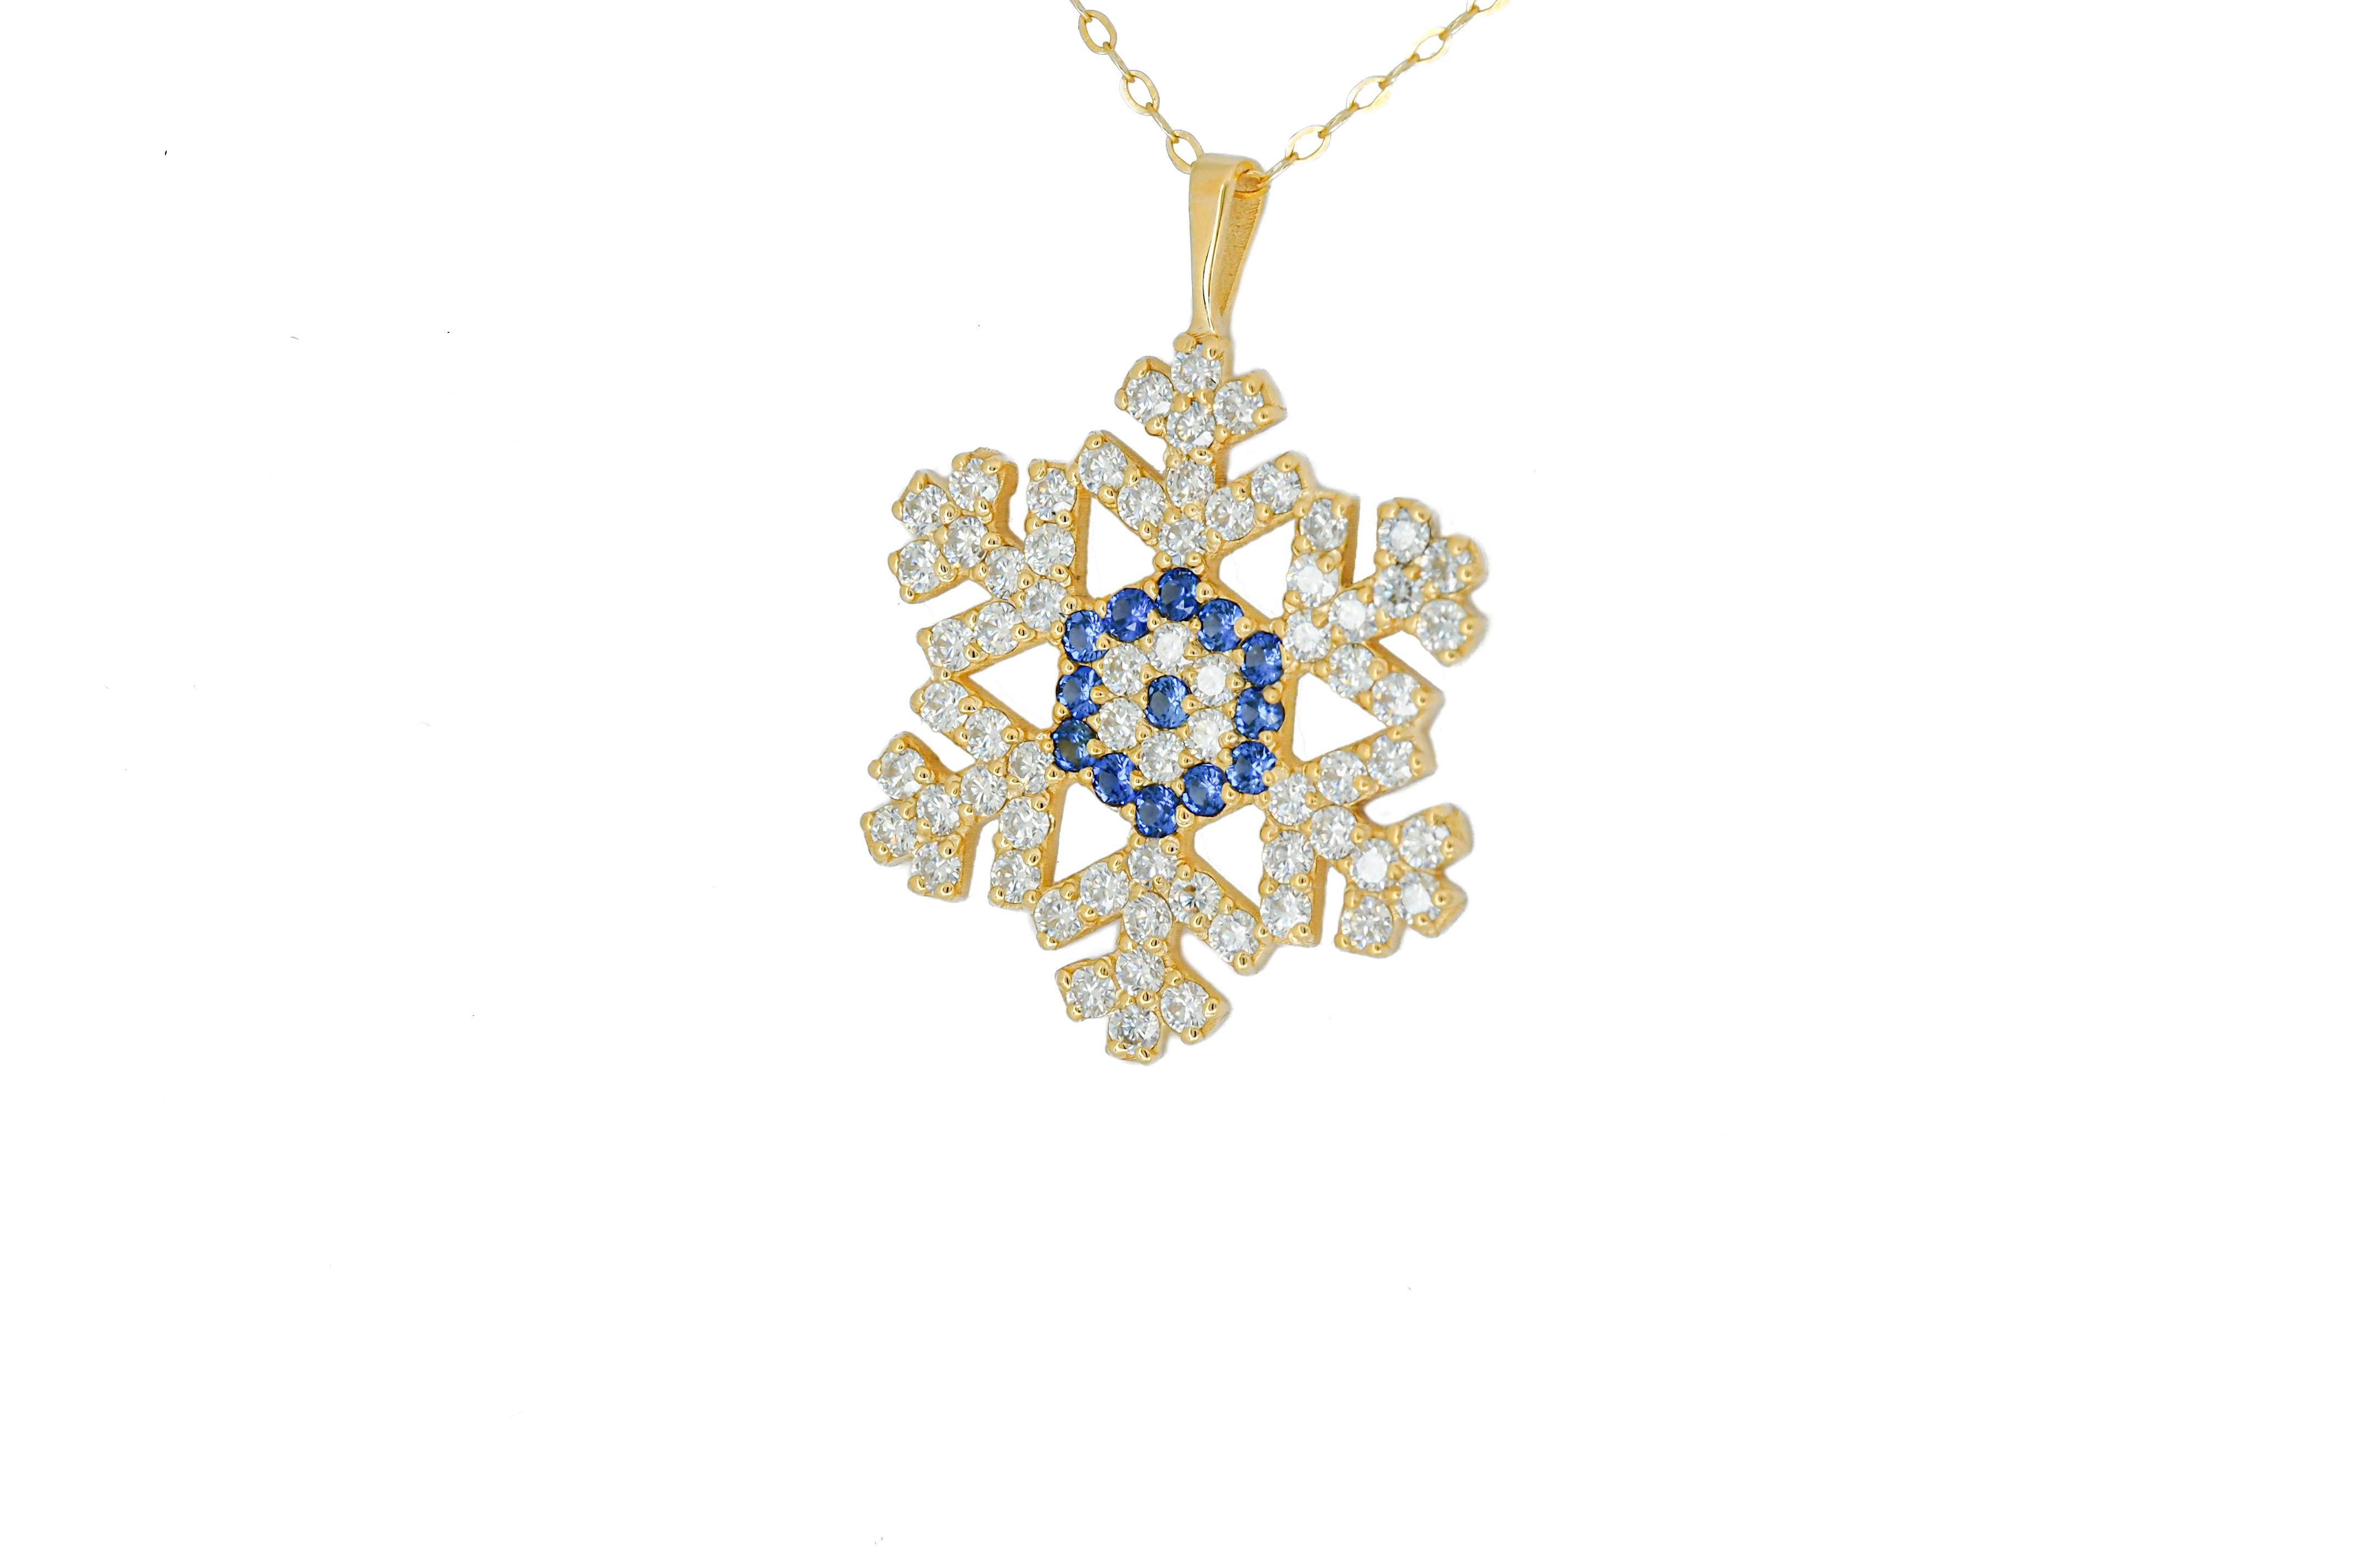 Snowflake charm necklace in 14k solid gold. Gold Snowflake Pendant. 1